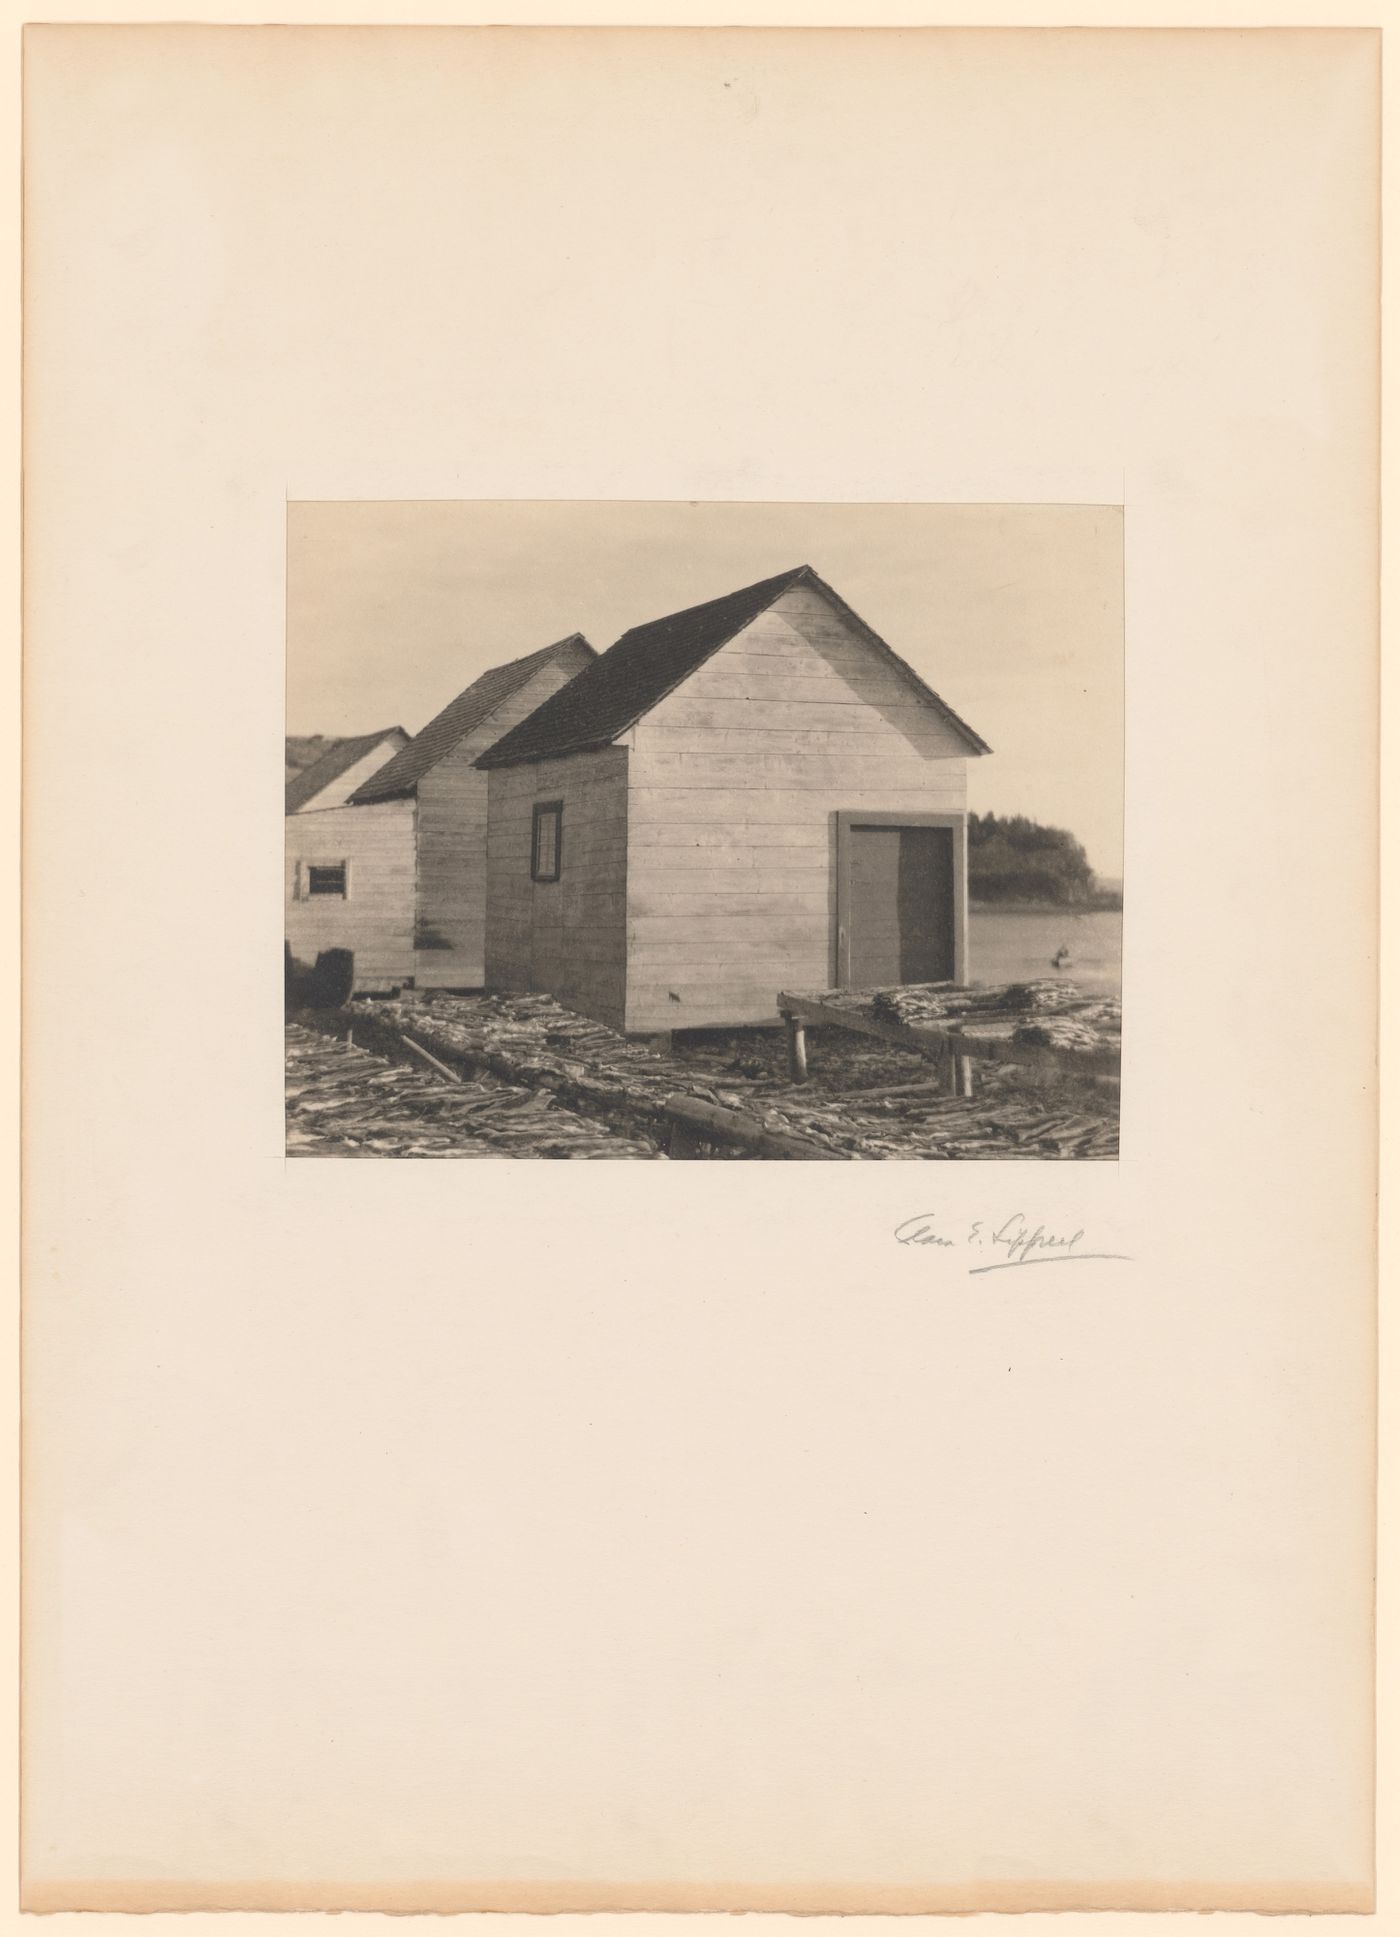 View of sheds and codfish drying on racks, Gaspé Peninsula, Québec, Canada